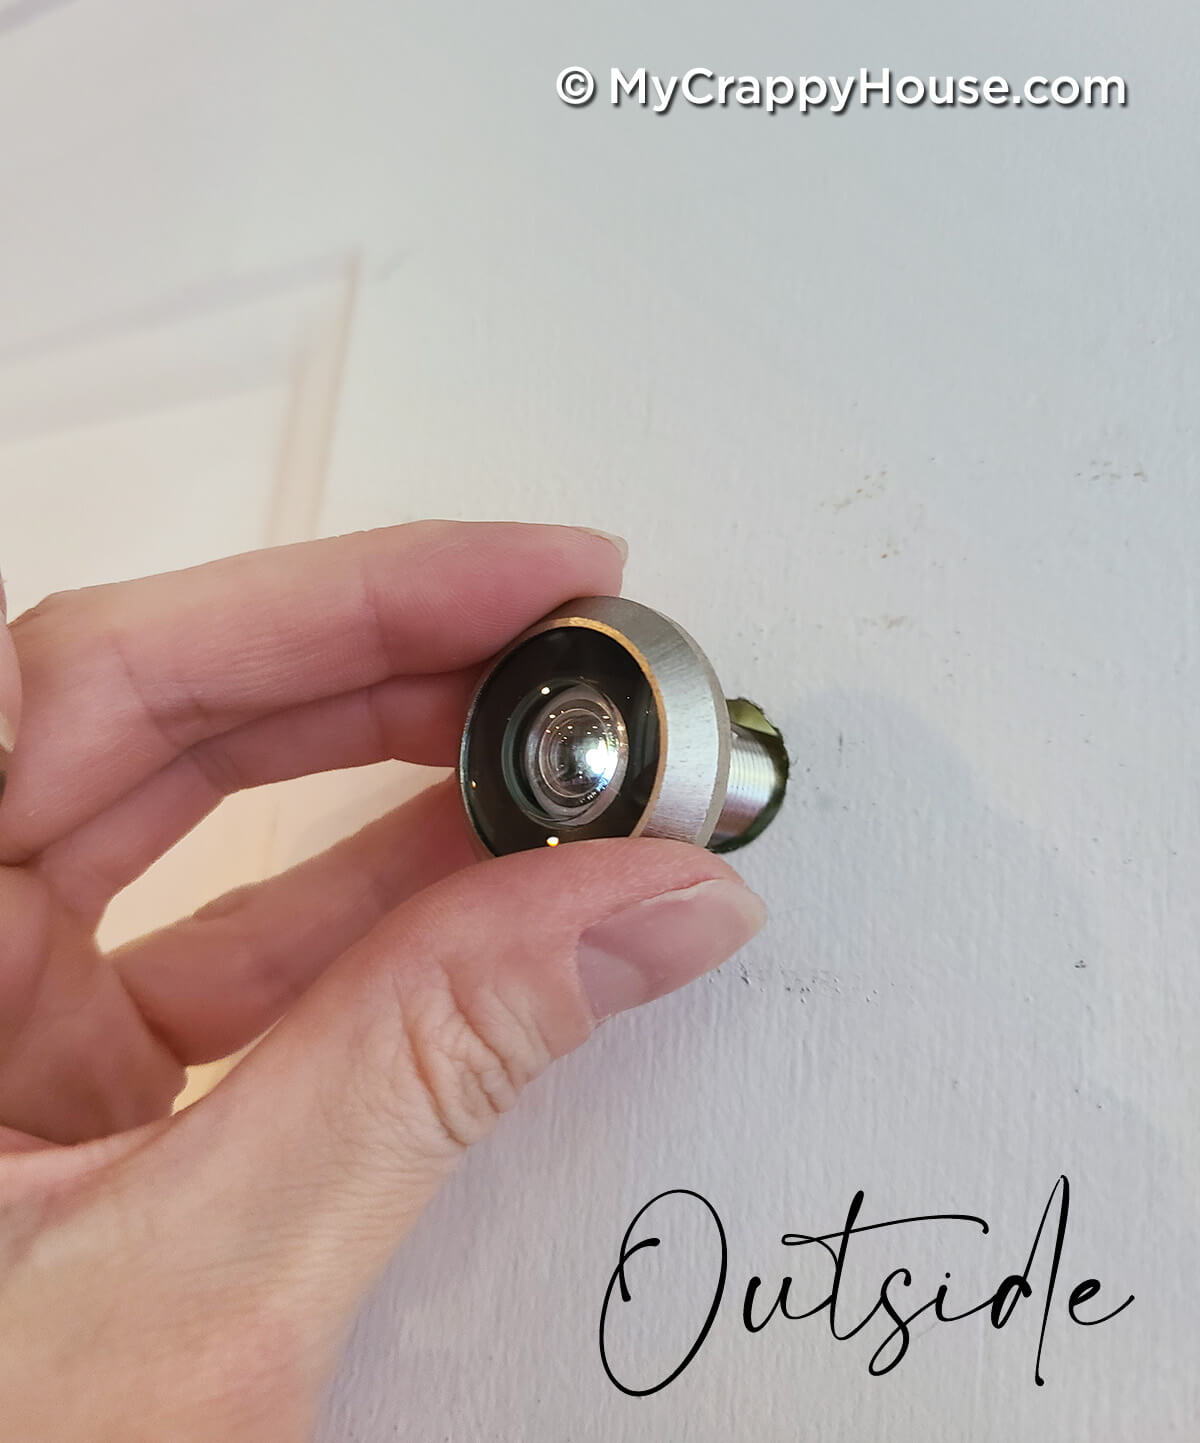 Installing a peephole on the outside of the door